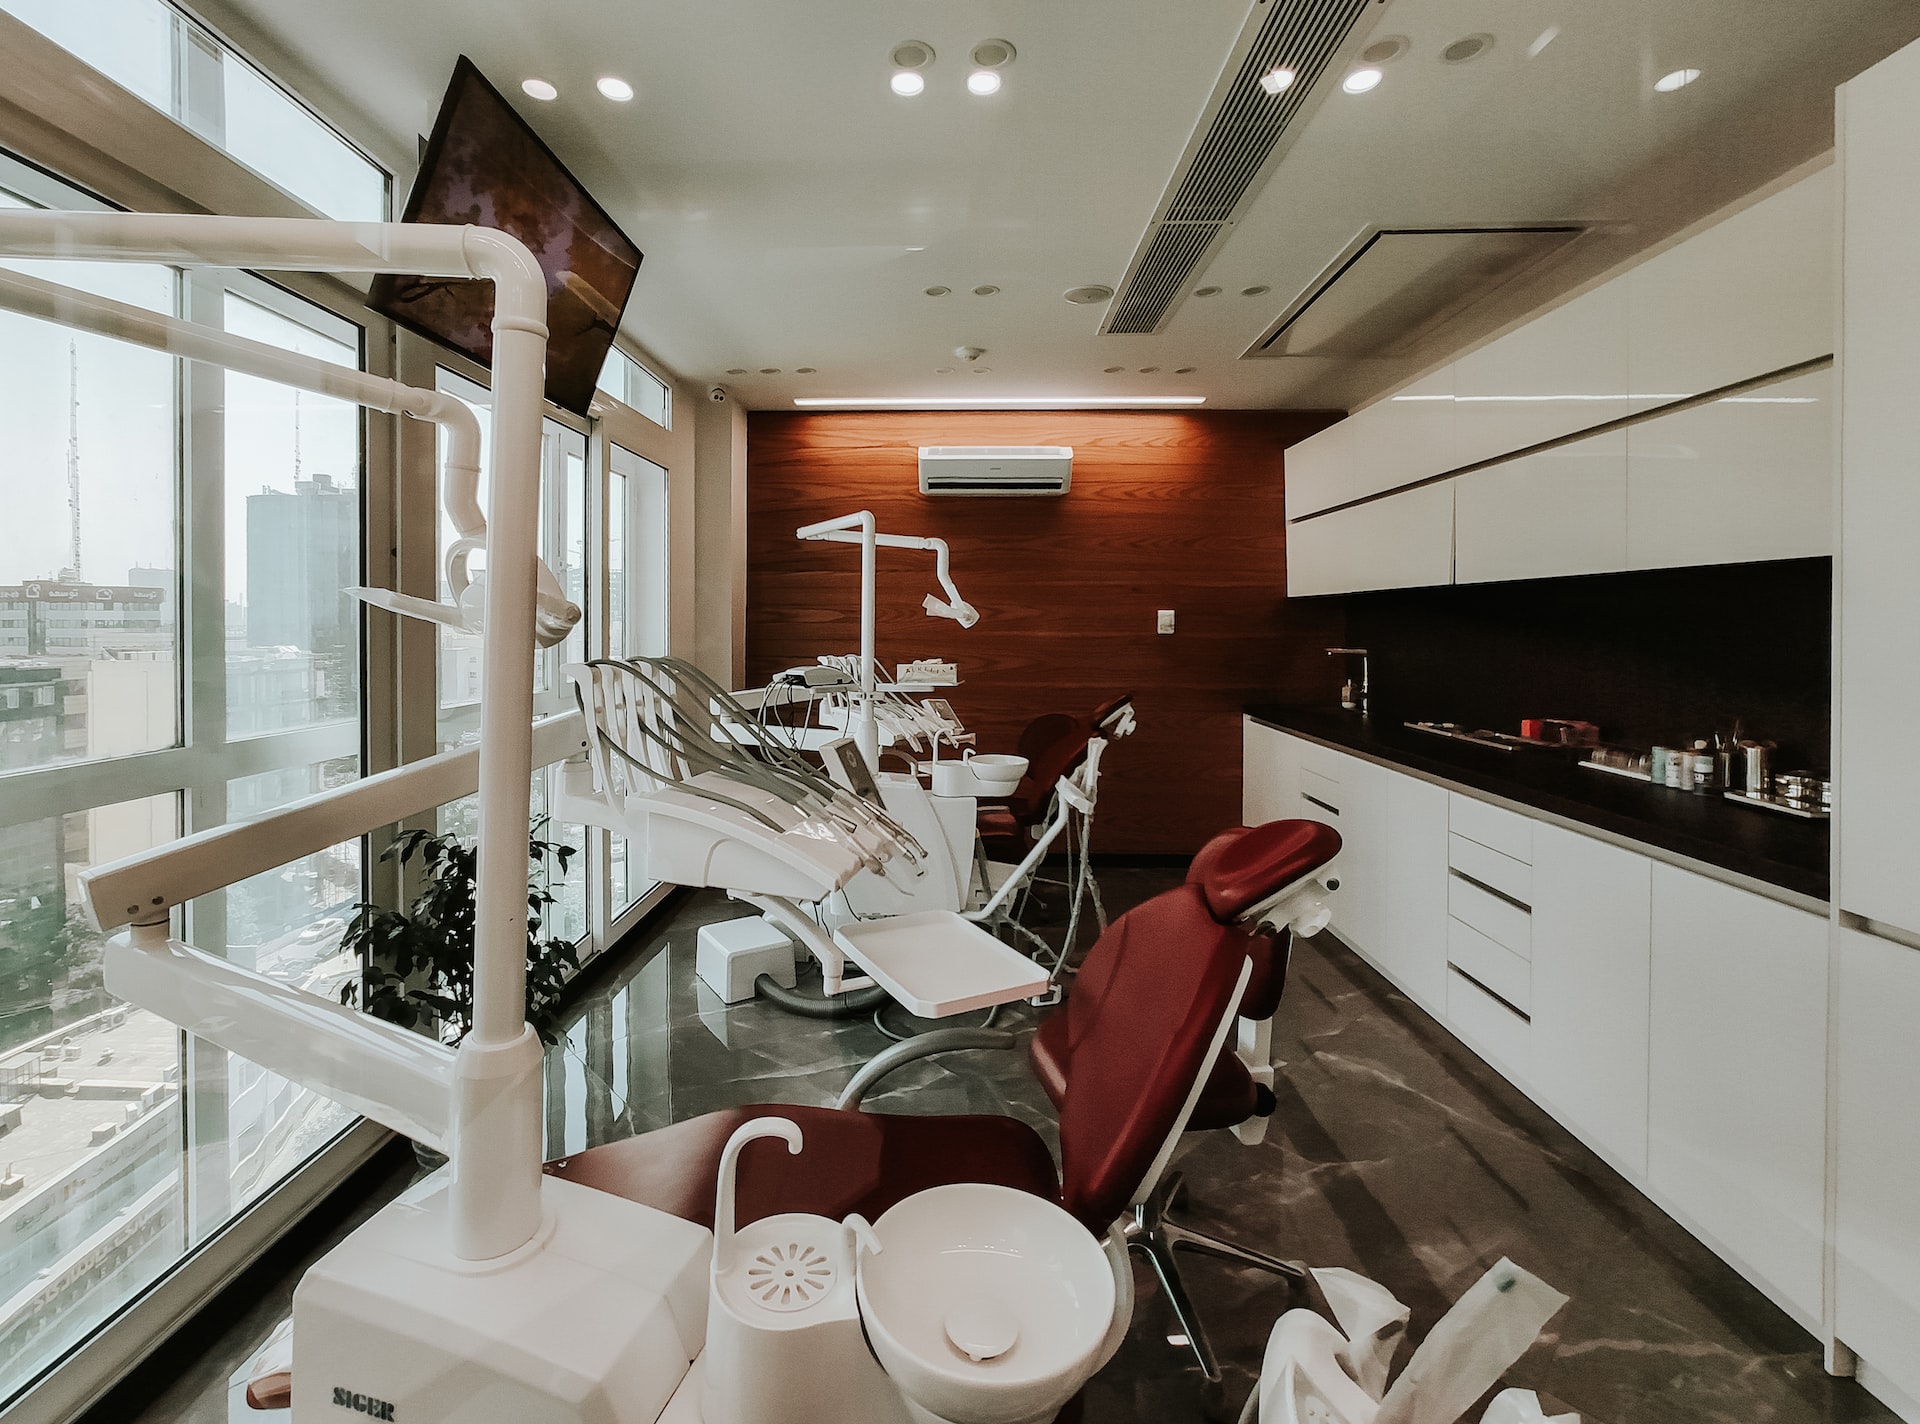 content marketing for dentists - dentist office with red chair